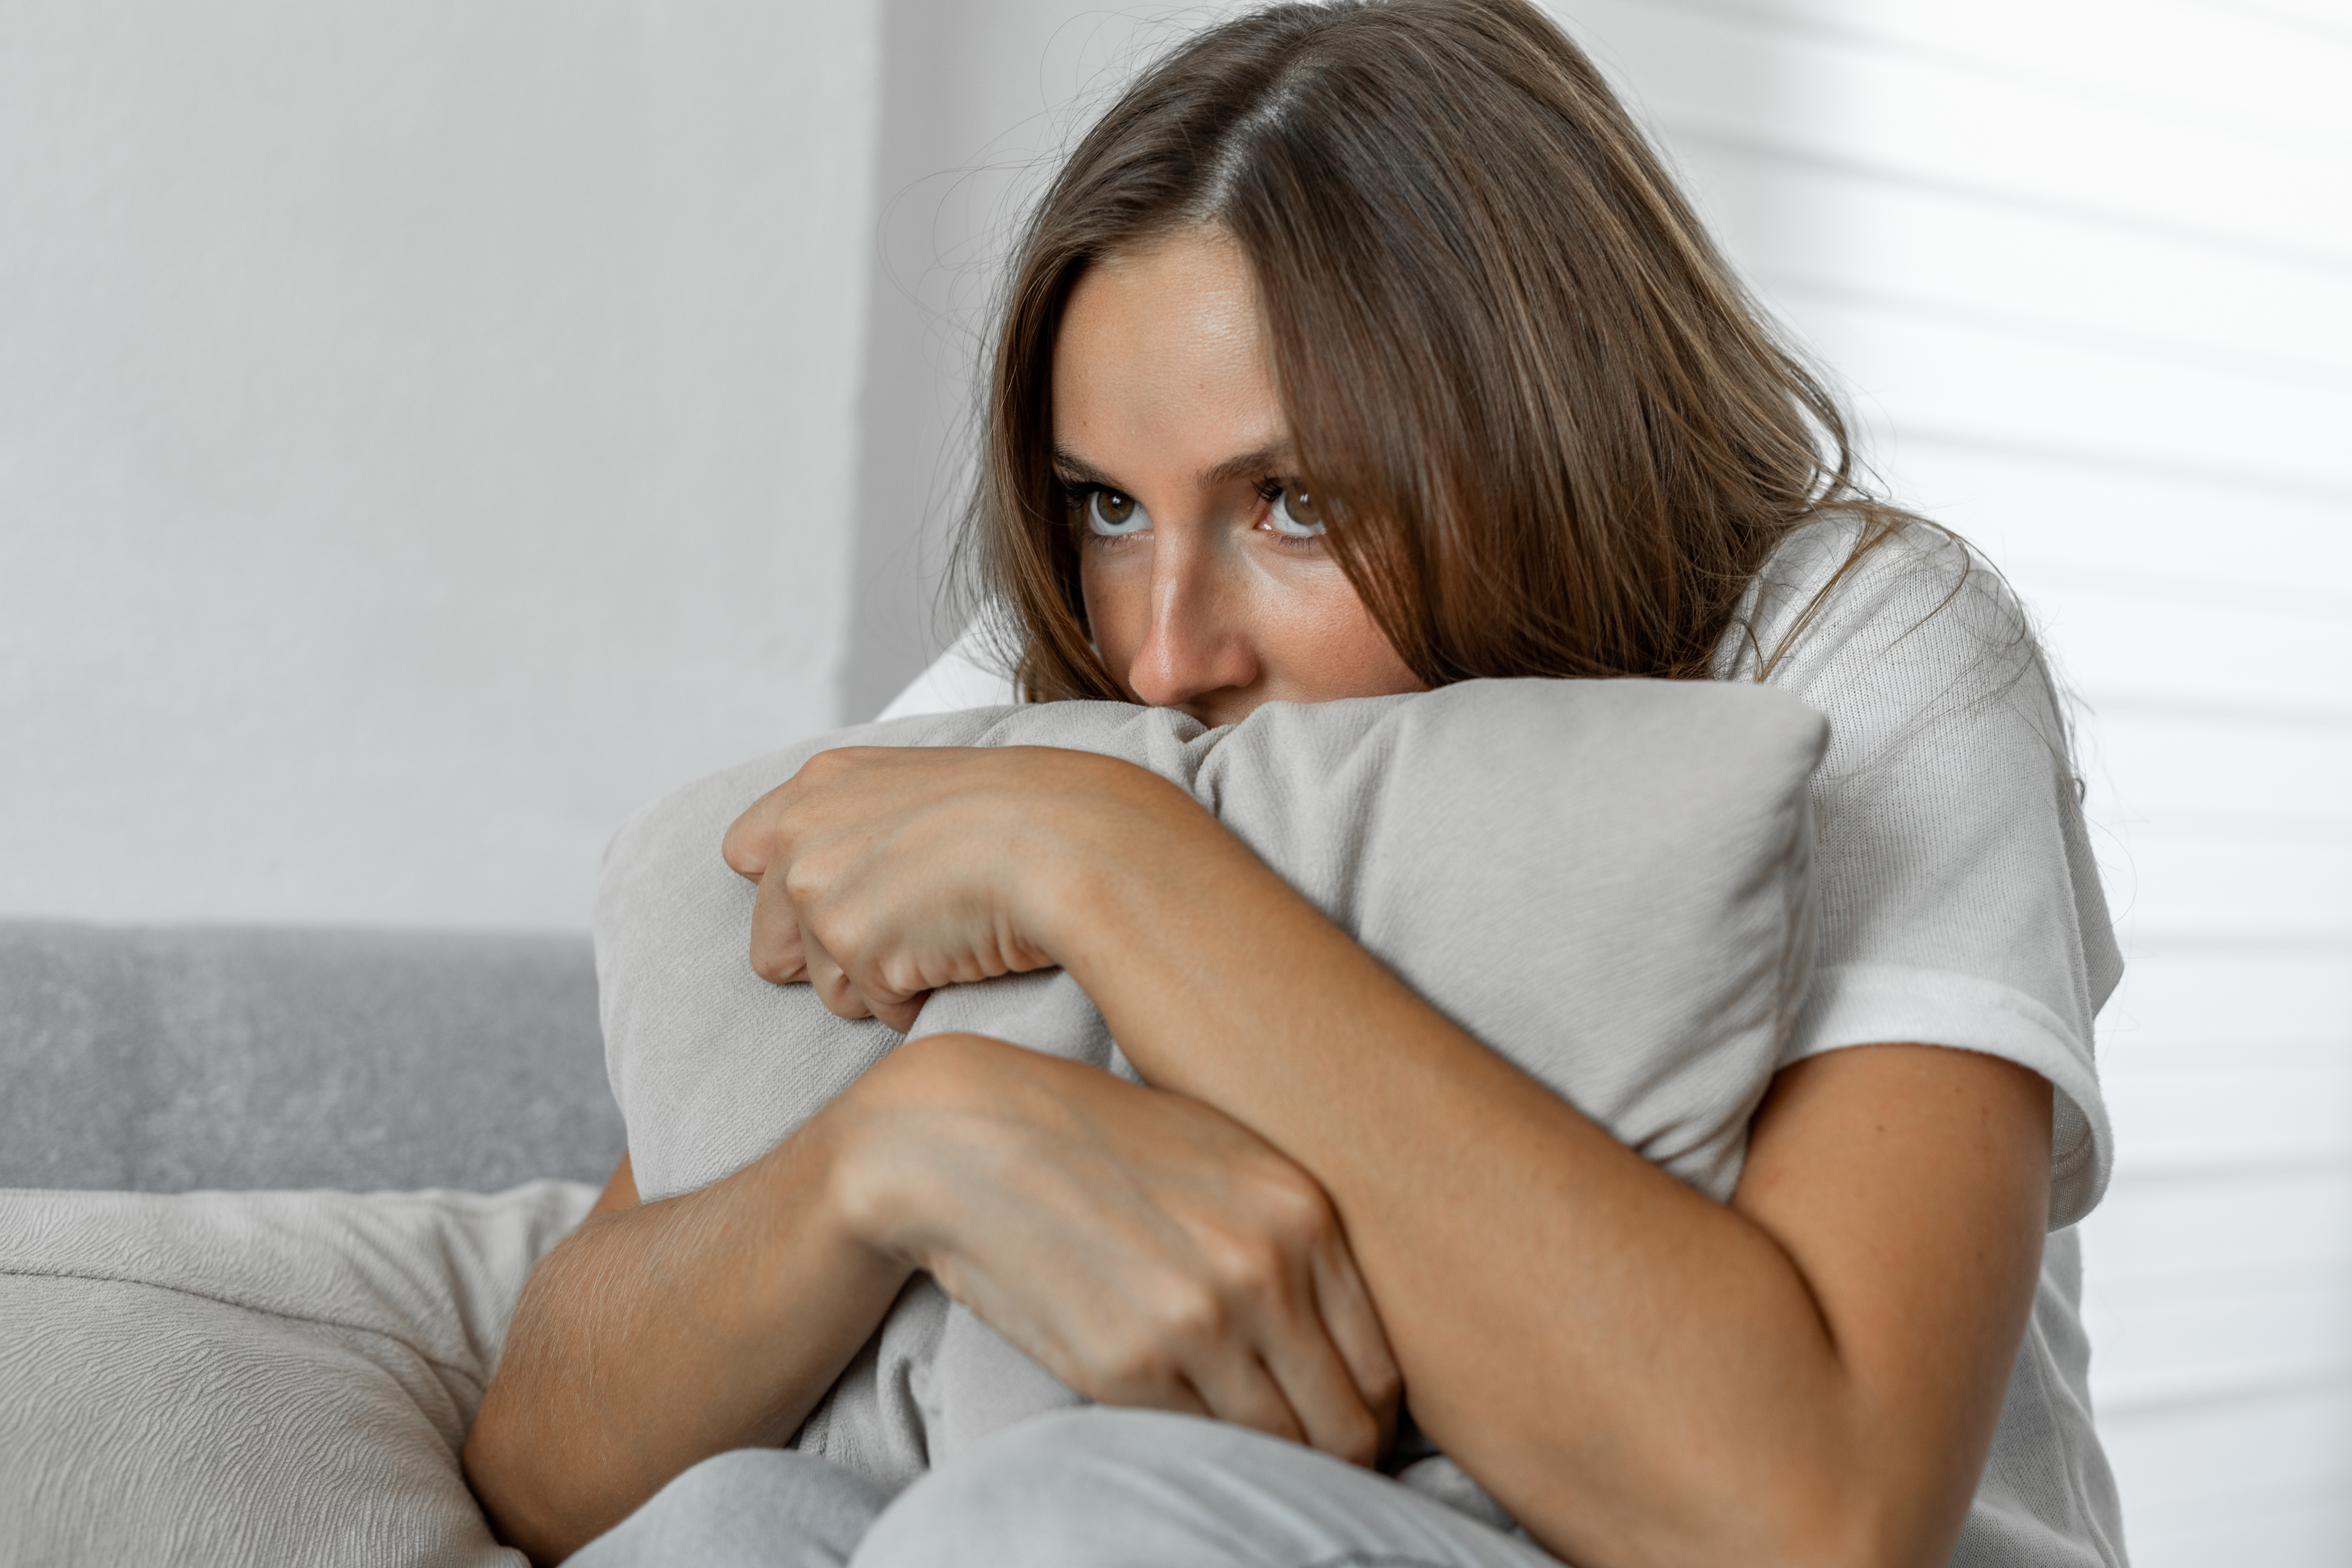 Scared woman at home embracing pillow sitting on a sofa | Source: Getty Images